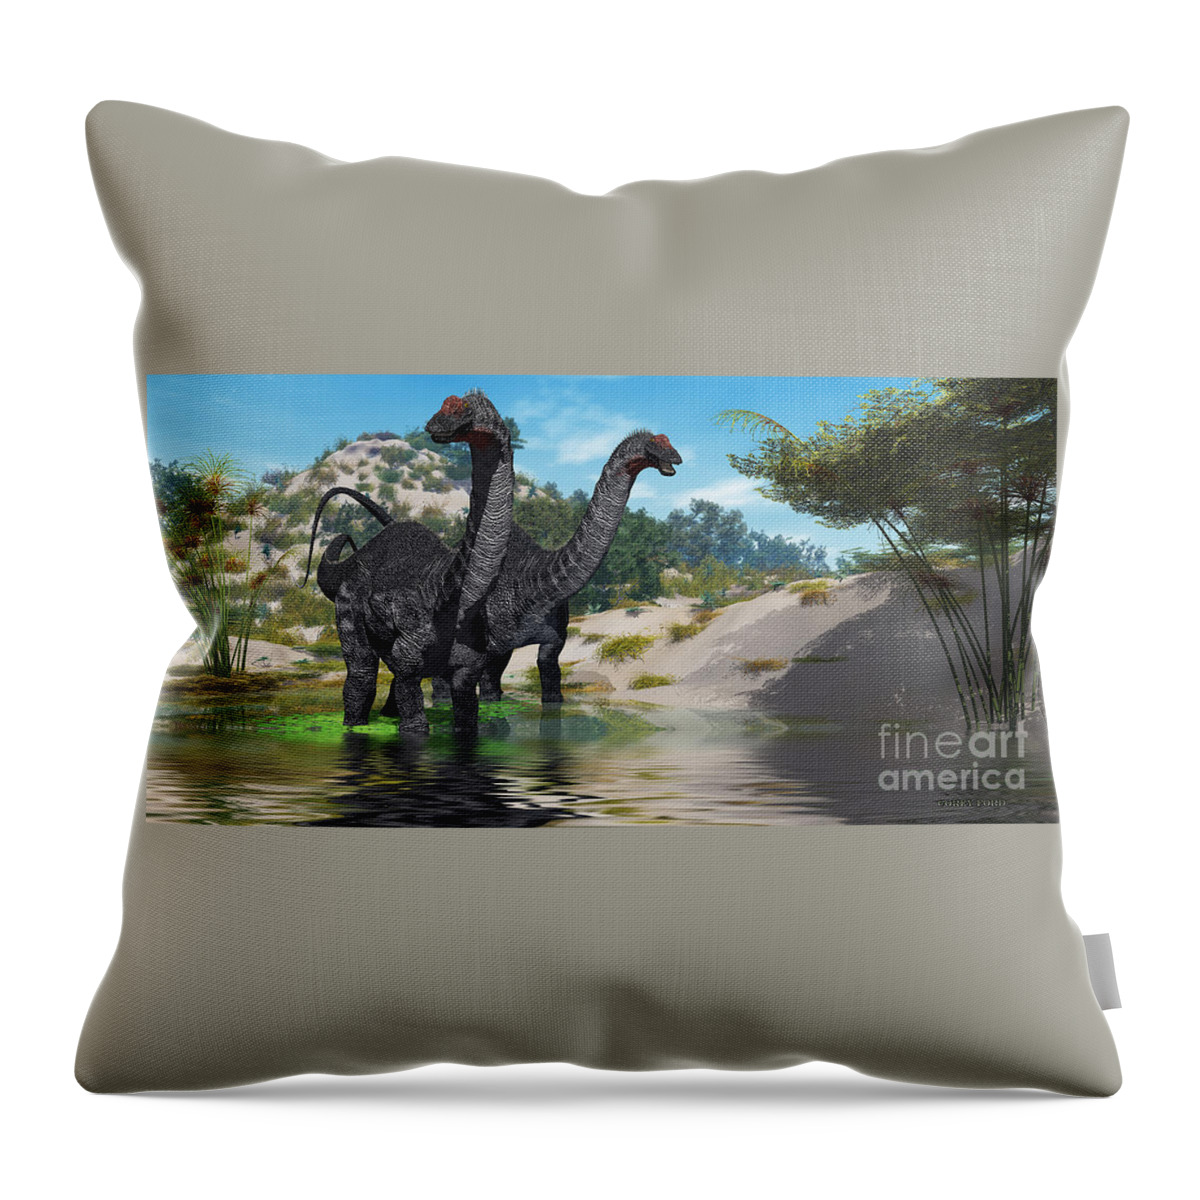 Apatosaurus Throw Pillow featuring the painting Apatosaurus Swamp by Corey Ford